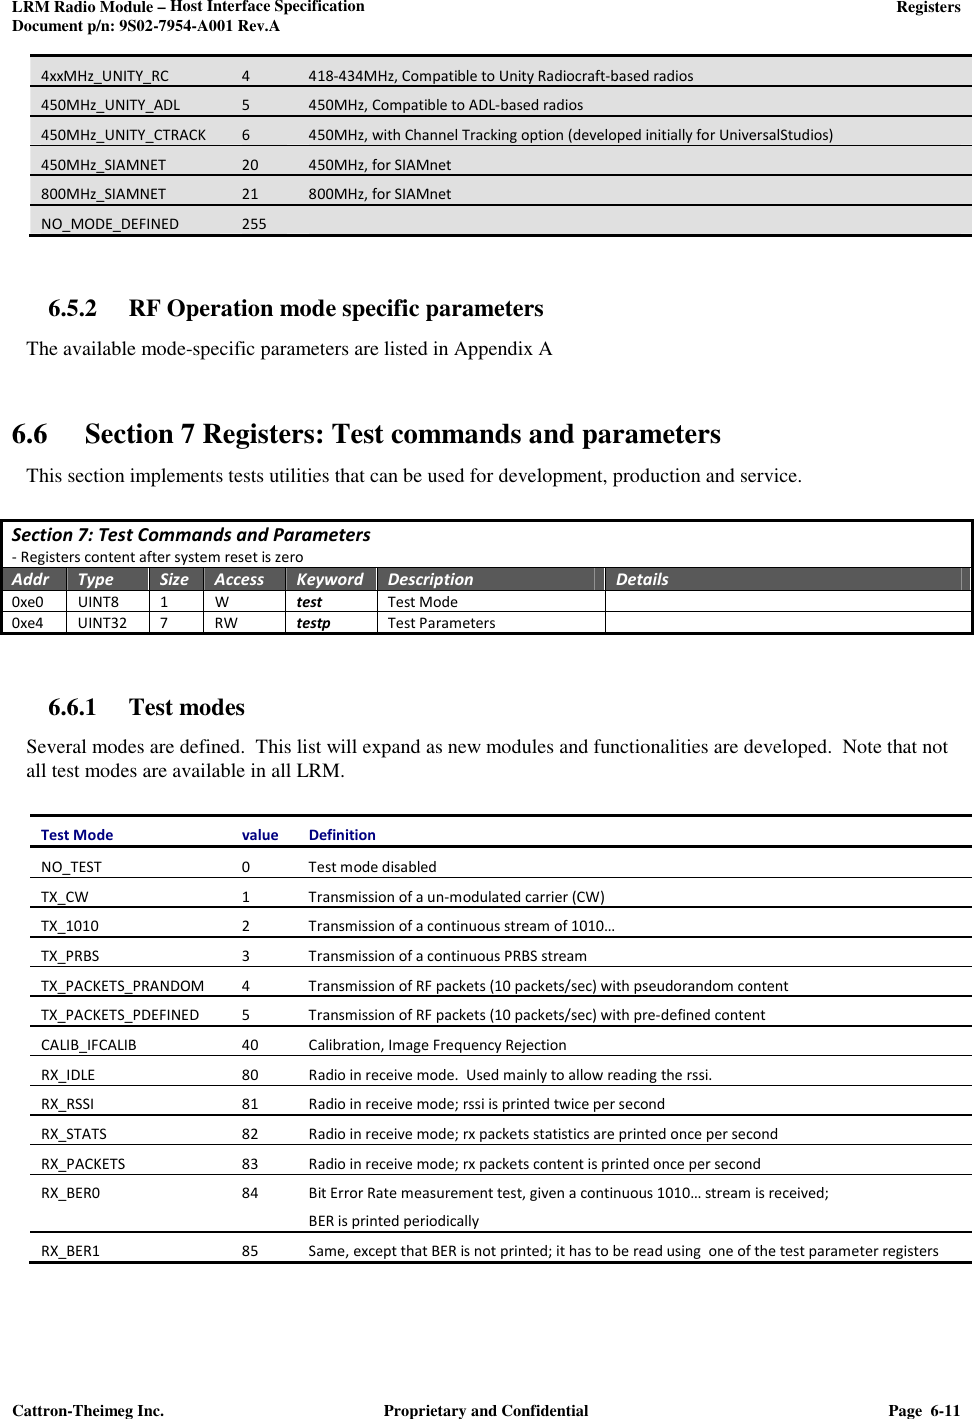 LRM Radio Module – Host Interface Specification     Registers  Document p/n: 9S02-7954-A001 Rev.A  Cattron-Theimeg Inc.  Proprietary and Confidential  Page  6-11  4xxMHz_UNITY_RC 4 418-434MHz, Compatible to Unity Radiocraft-based radios 450MHz_UNITY_ADL  5  450MHz, Compatible to ADL-based radios 450MHz_UNITY_CTRACK  6  450MHz, with Channel Tracking option (developed initially for UniversalStudios)  450MHz_SIAMNET 20 450MHz, for SIAMnet 800MHz_SIAMNET 21 800MHz, for SIAMnet NO_MODE_DEFINED  255    6.5.2 RF Operation mode specific parameters The available mode-specific parameters are listed in Appendix A  6.6 Section 7 Registers: Test commands and parameters This section implements tests utilities that can be used for development, production and service.  Section 7: Test Commands and Parameters - Registers content after system reset is zero Addr Type Size Access Keyword Description Details 0xe0  UINT8  1  W  test  Test Mode   0xe4  UINT32 7 RW testp Test Parameters     6.6.1 Test modes  Several modes are defined.  This list will expand as new modules and functionalities are developed.  Note that not all test modes are available in all LRM.   Test Mode  value  Definition NO_TEST 0 Test mode disabled TX_CW 1 Transmission of a un-modulated carrier (CW) TX_1010  2  Transmission of a continuous stream of 1010… TX_PRBS  3  Transmission of a continuous PRBS stream TX_PACKETS_PRANDOM 4 Transmission of RF packets (10 packets/sec) with pseudorandom content TX_PACKETS_PDEFINED 5 Transmission of RF packets (10 packets/sec) with pre-defined content CALIB_IFCALIB  40  Calibration, Image Frequency Rejection RX_IDLE  80  Radio in receive mode.  Used mainly to allow reading the rssi.  RX_RSSI 81 Radio in receive mode; rssi is printed twice per second RX_STATS 82 Radio in receive mode; rx packets statistics are printed once per second RX_PACKETS  83  Radio in receive mode; rx packets content is printed once per second RX_BER0  84  Bit Error Rate measurement test, given a continuous 1010… stream is received; BER is printed periodically RX_BER1 85 Same, except that BER is not printed; it has to be read using  one of the test parameter registers 